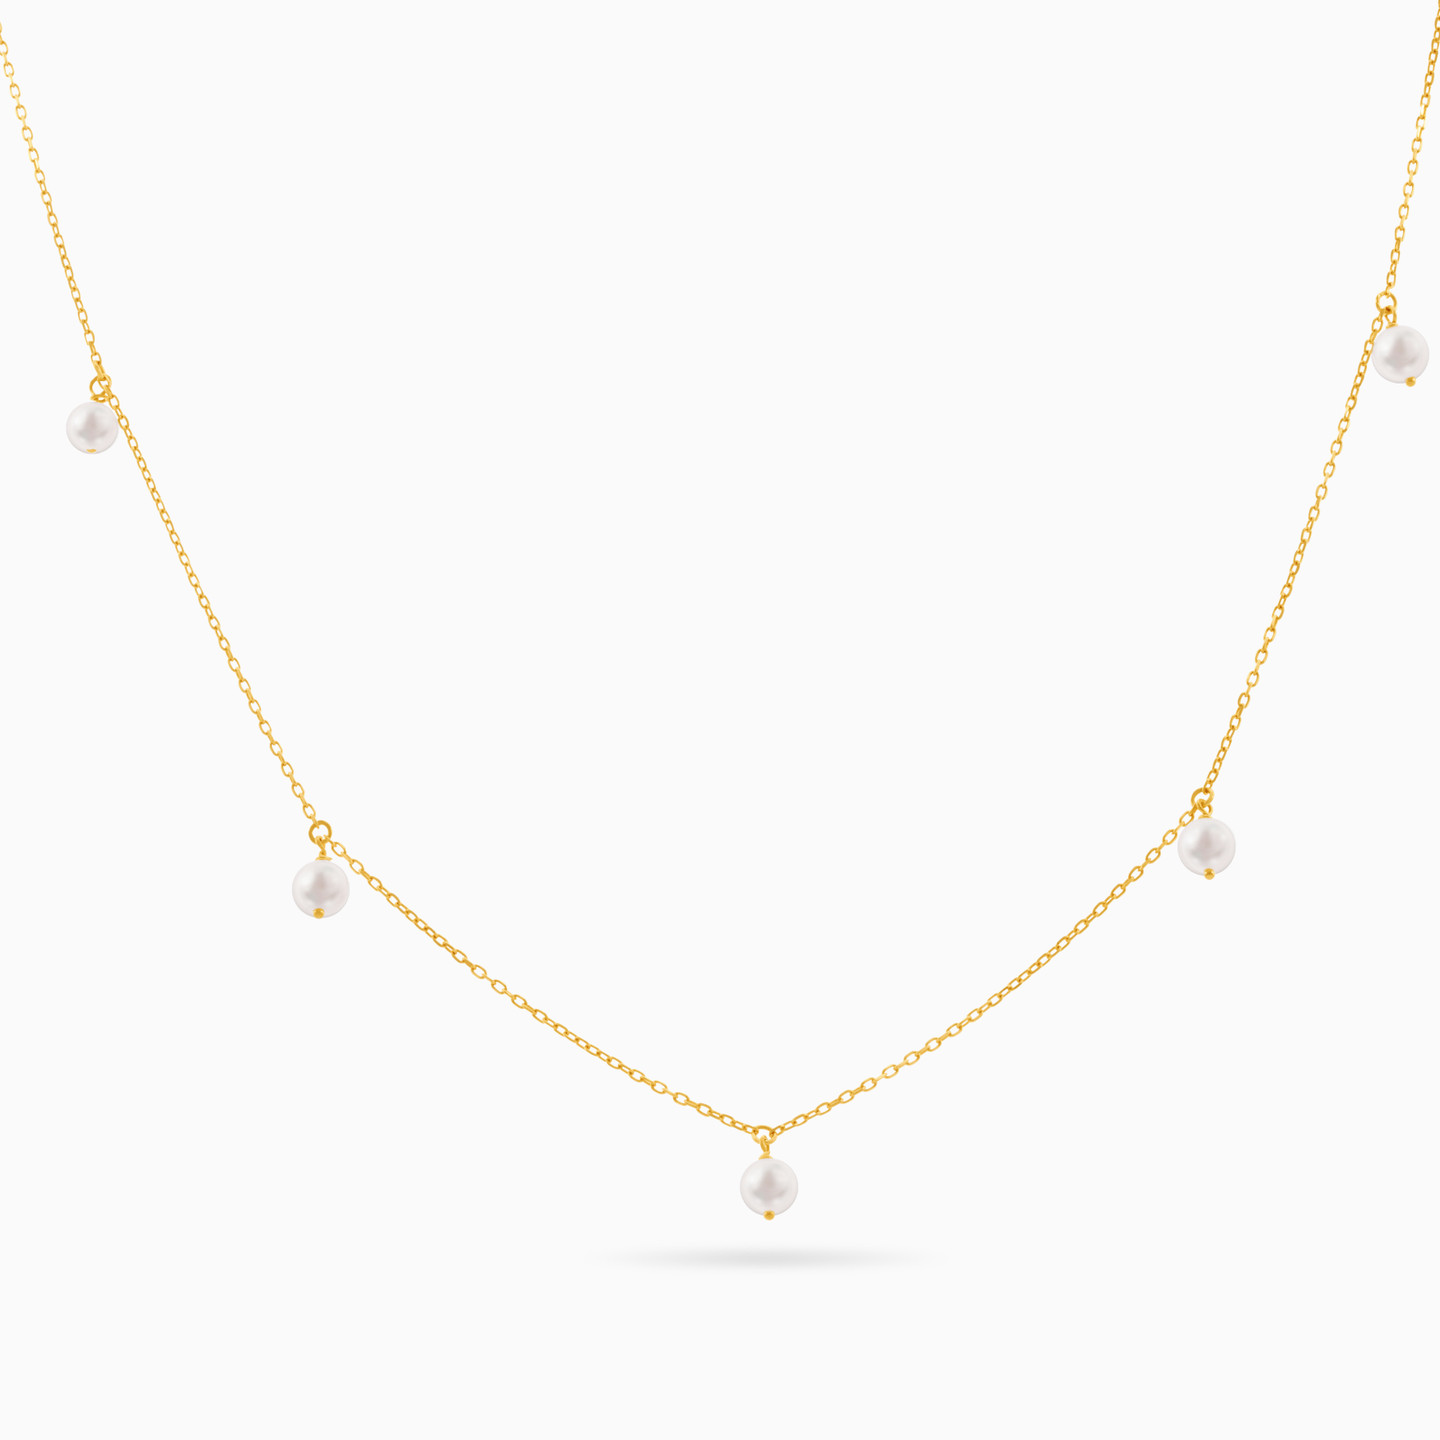 18K Gold Pearl Chain Necklace - 3